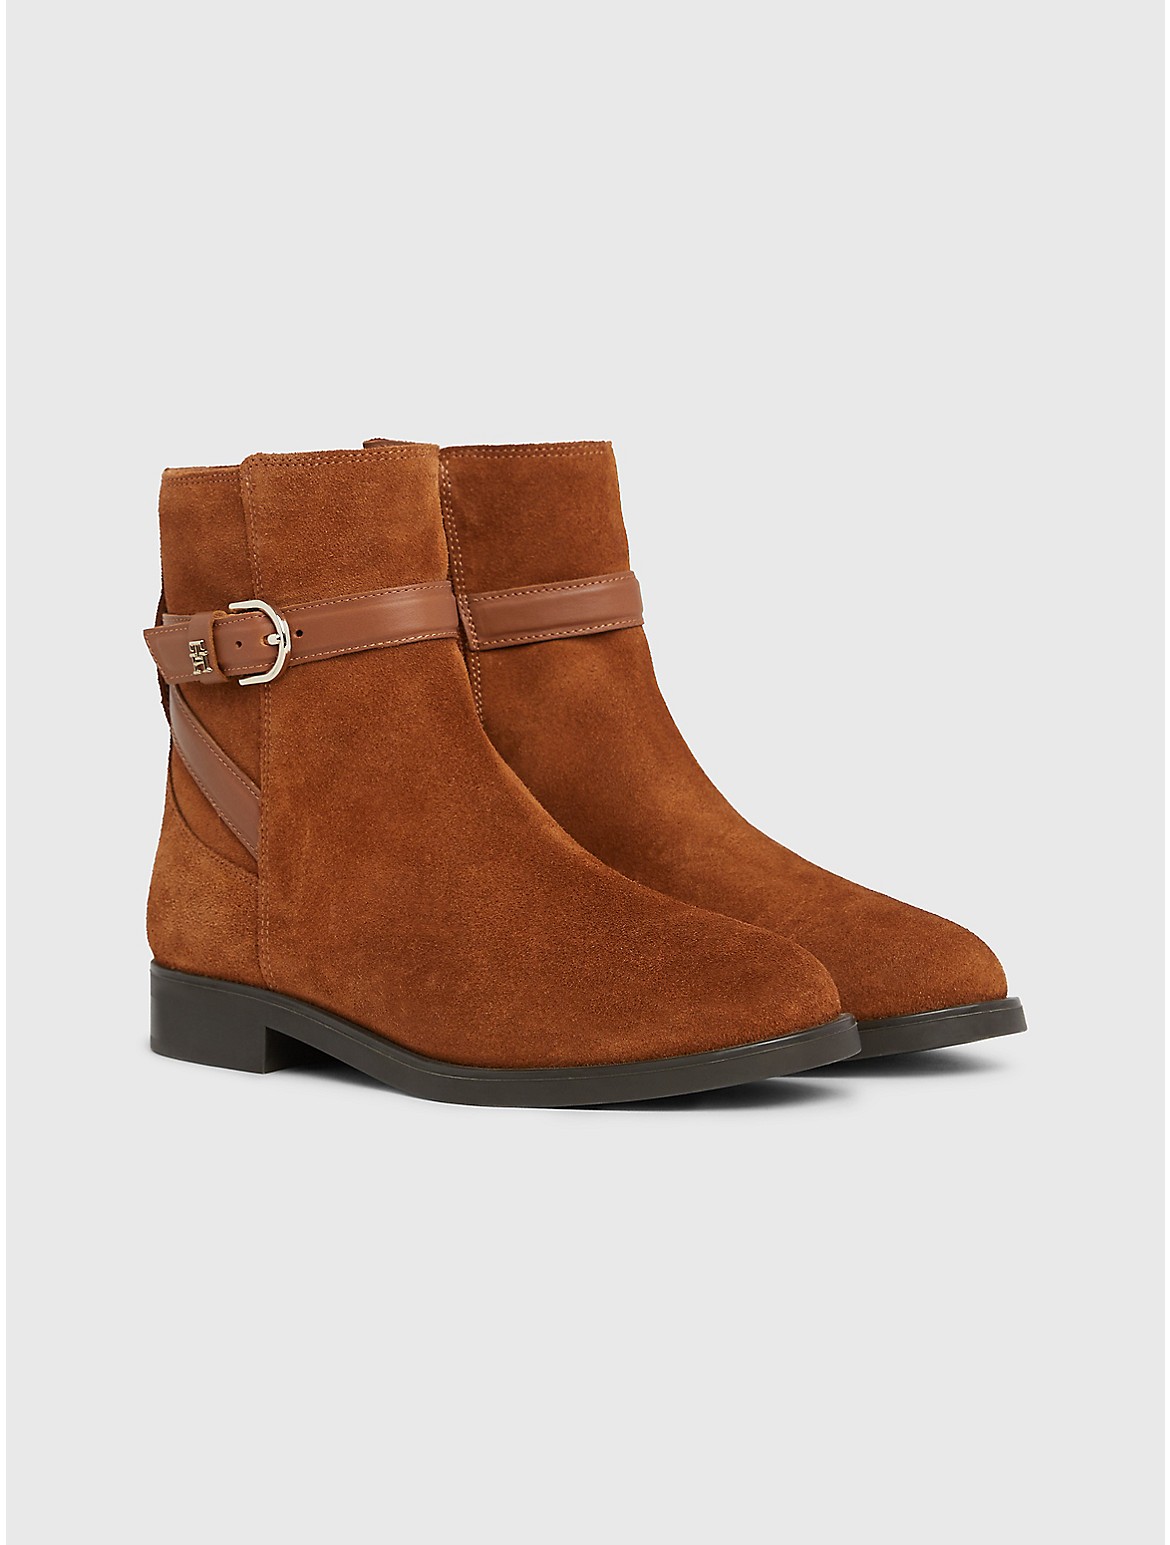 Tommy Hilfiger Women's Luxe Suede Boot